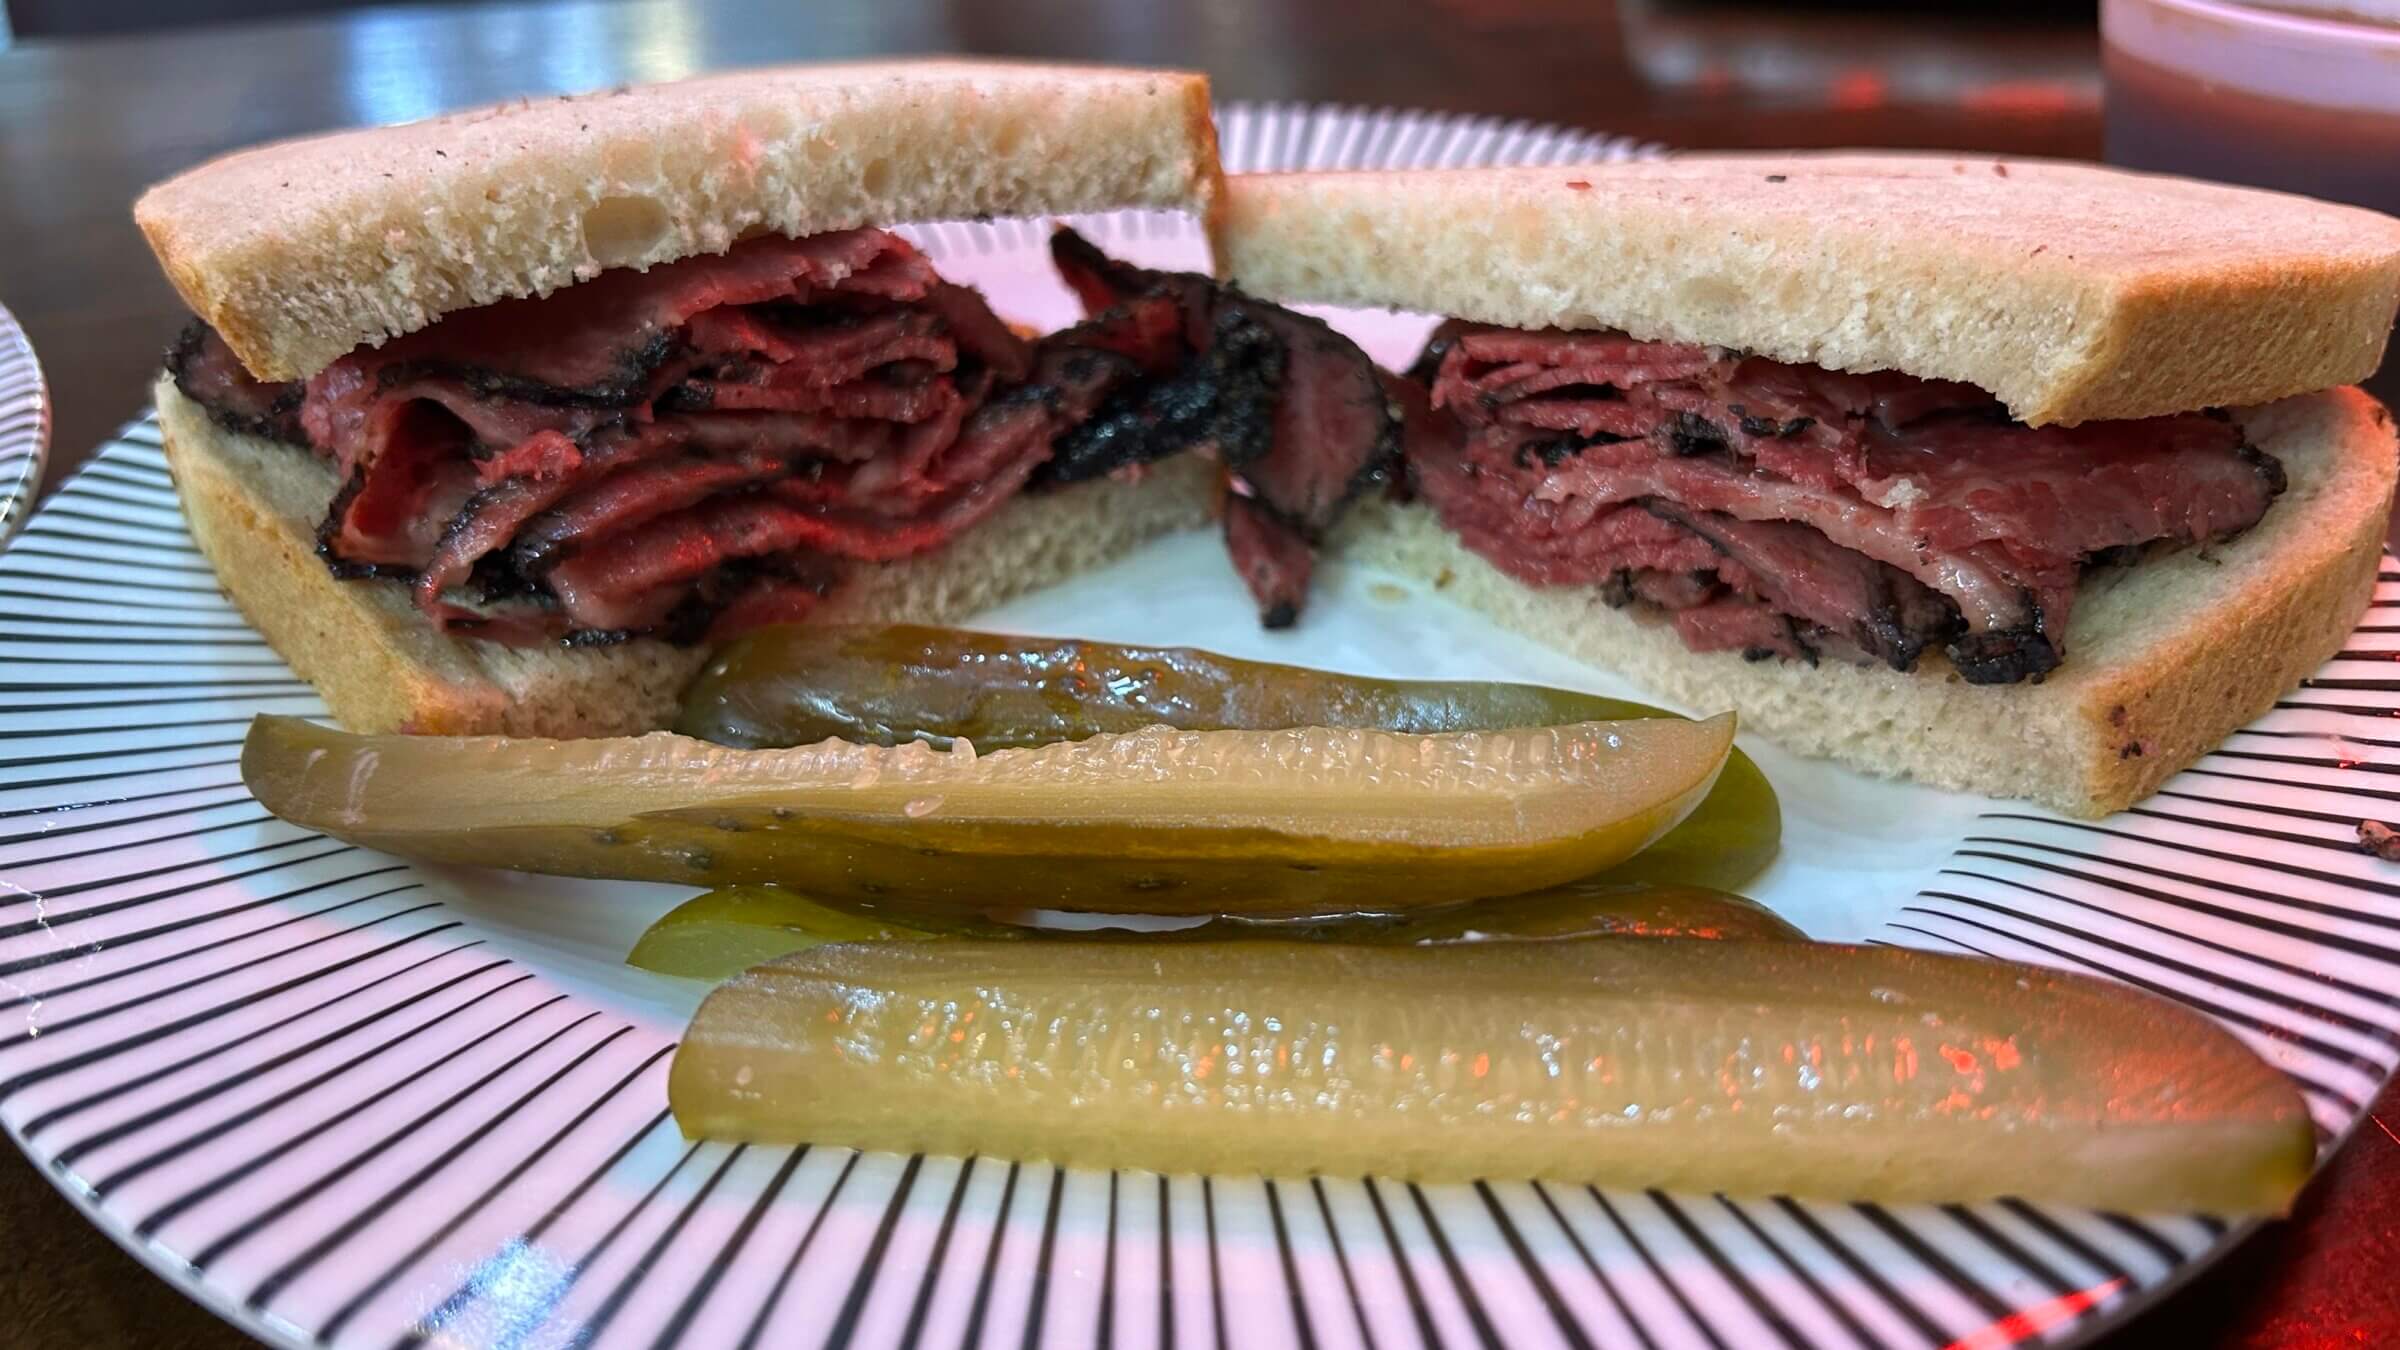 David's Brisket House makes pastrami based on recipes from the 1950s.